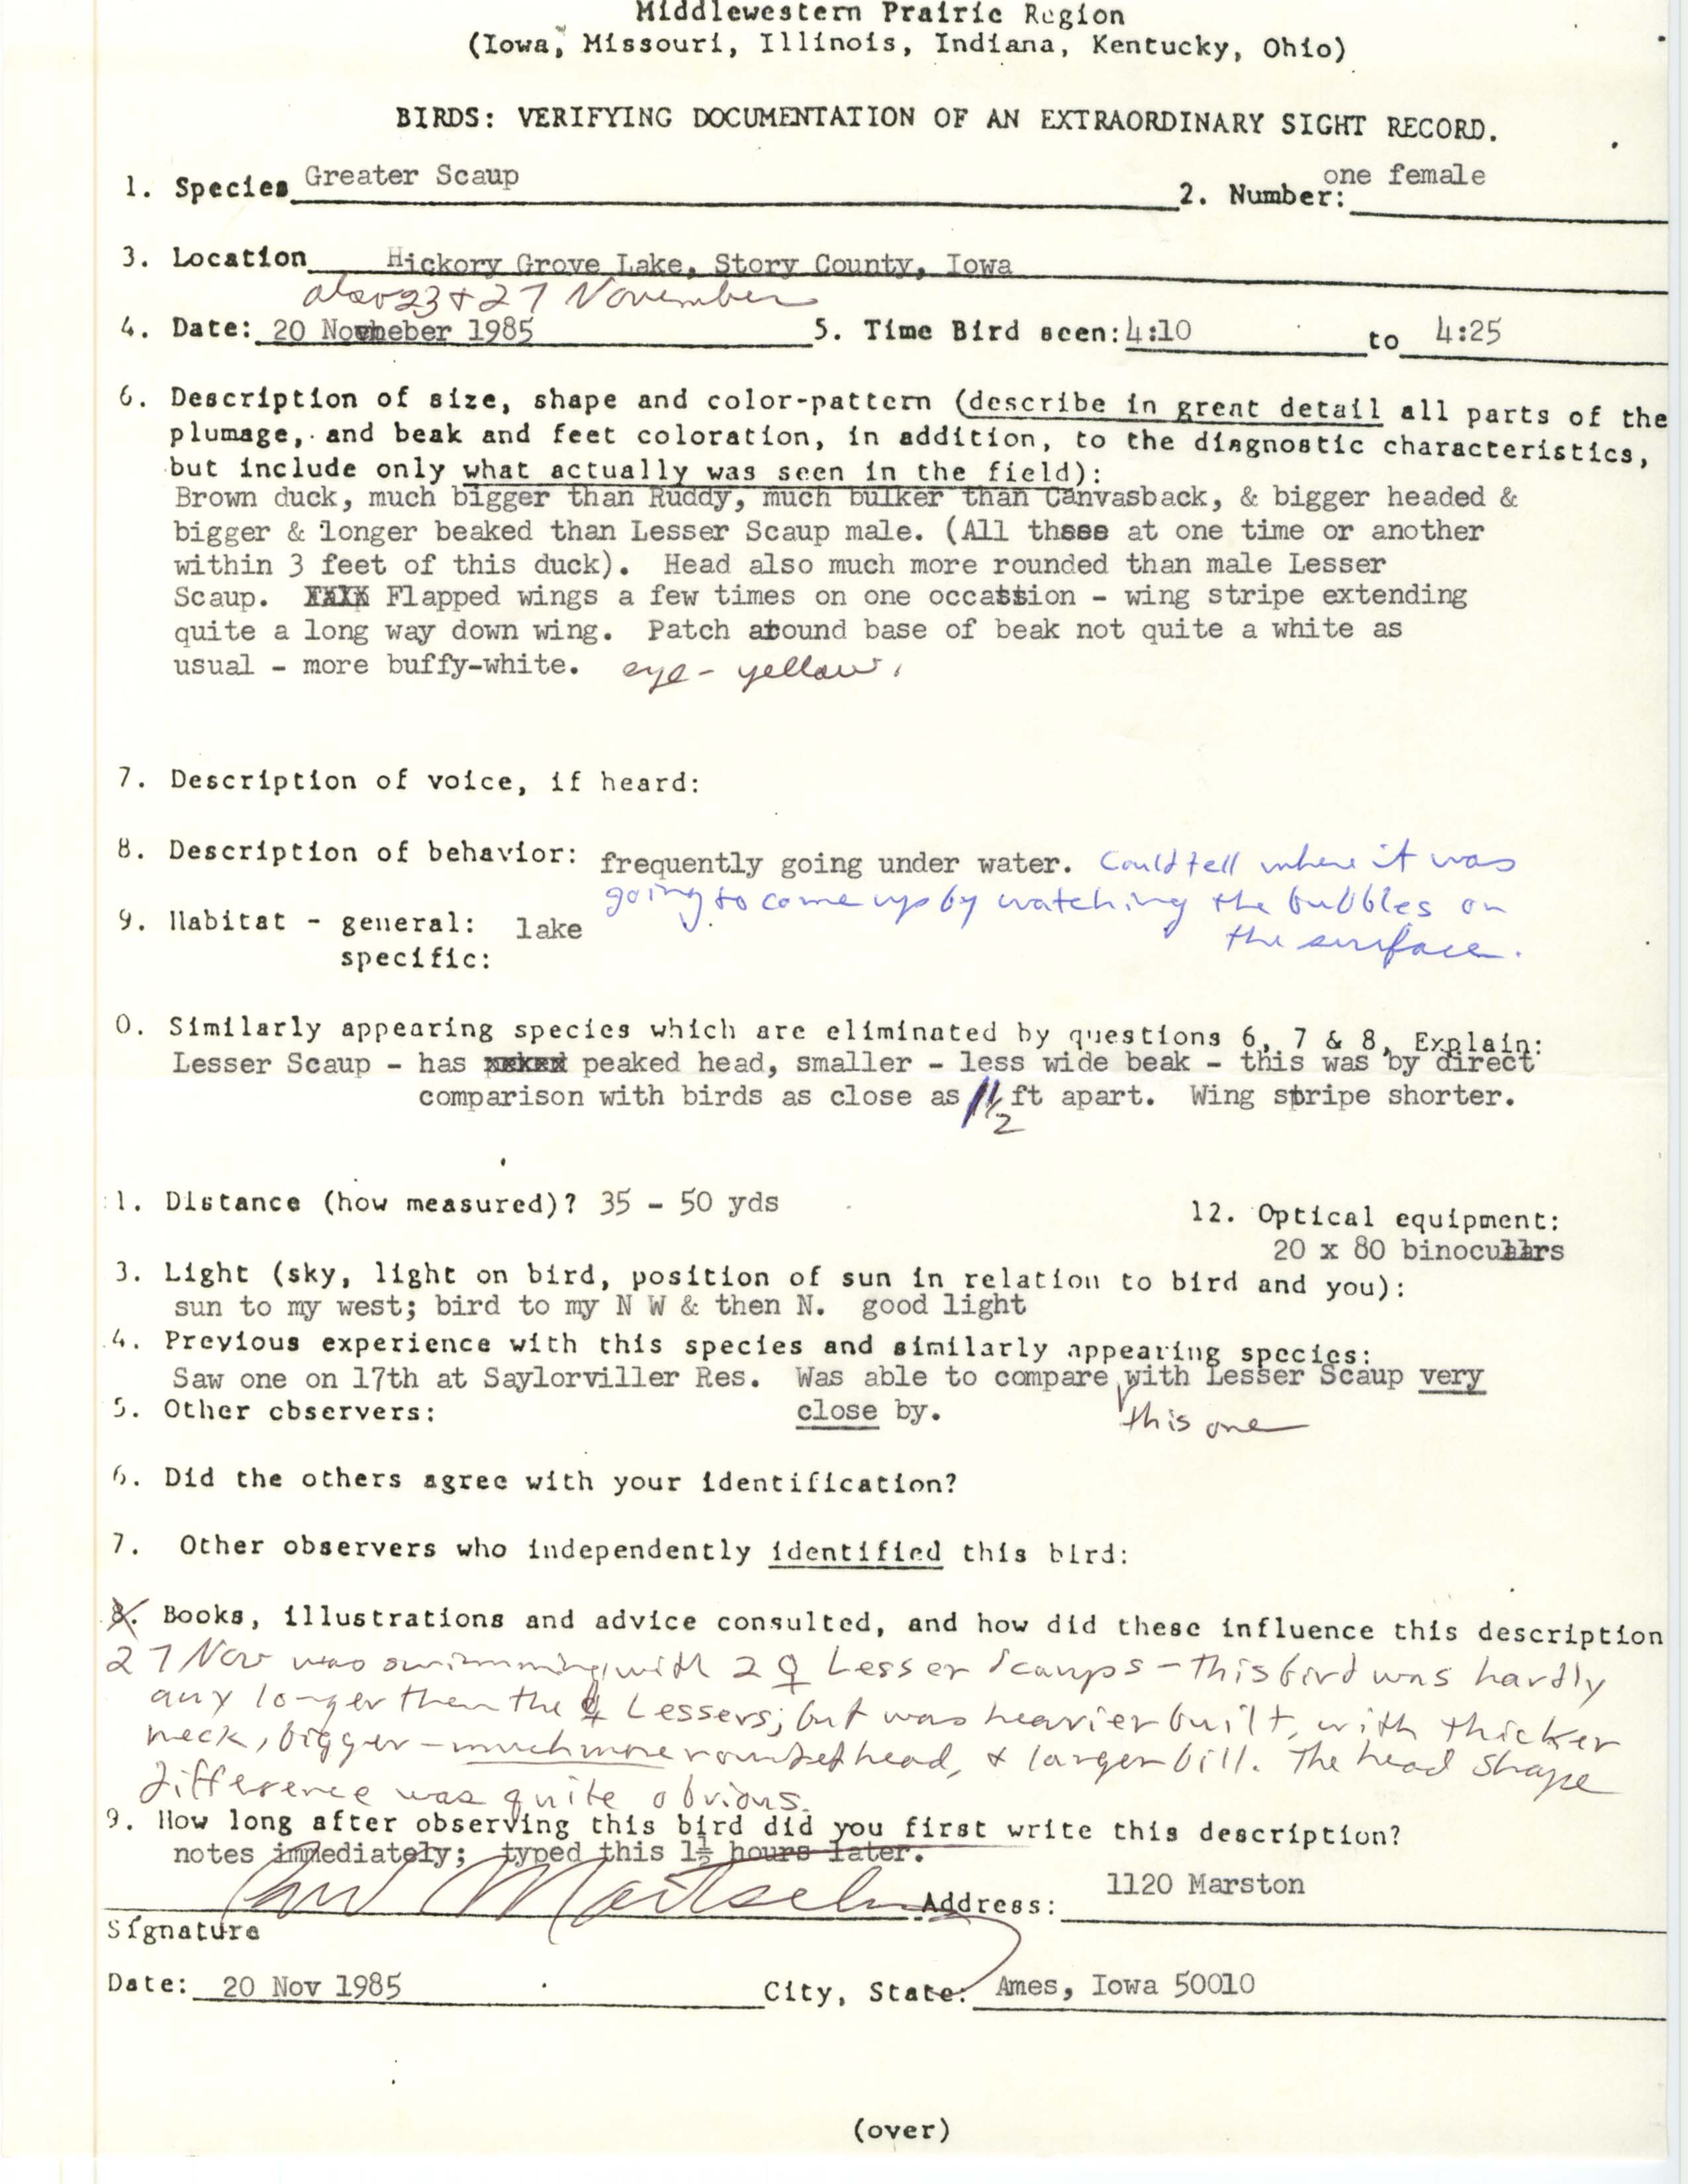 Rare bird documentation form for Greater Scaup at Hickory Grove Lake in 1985